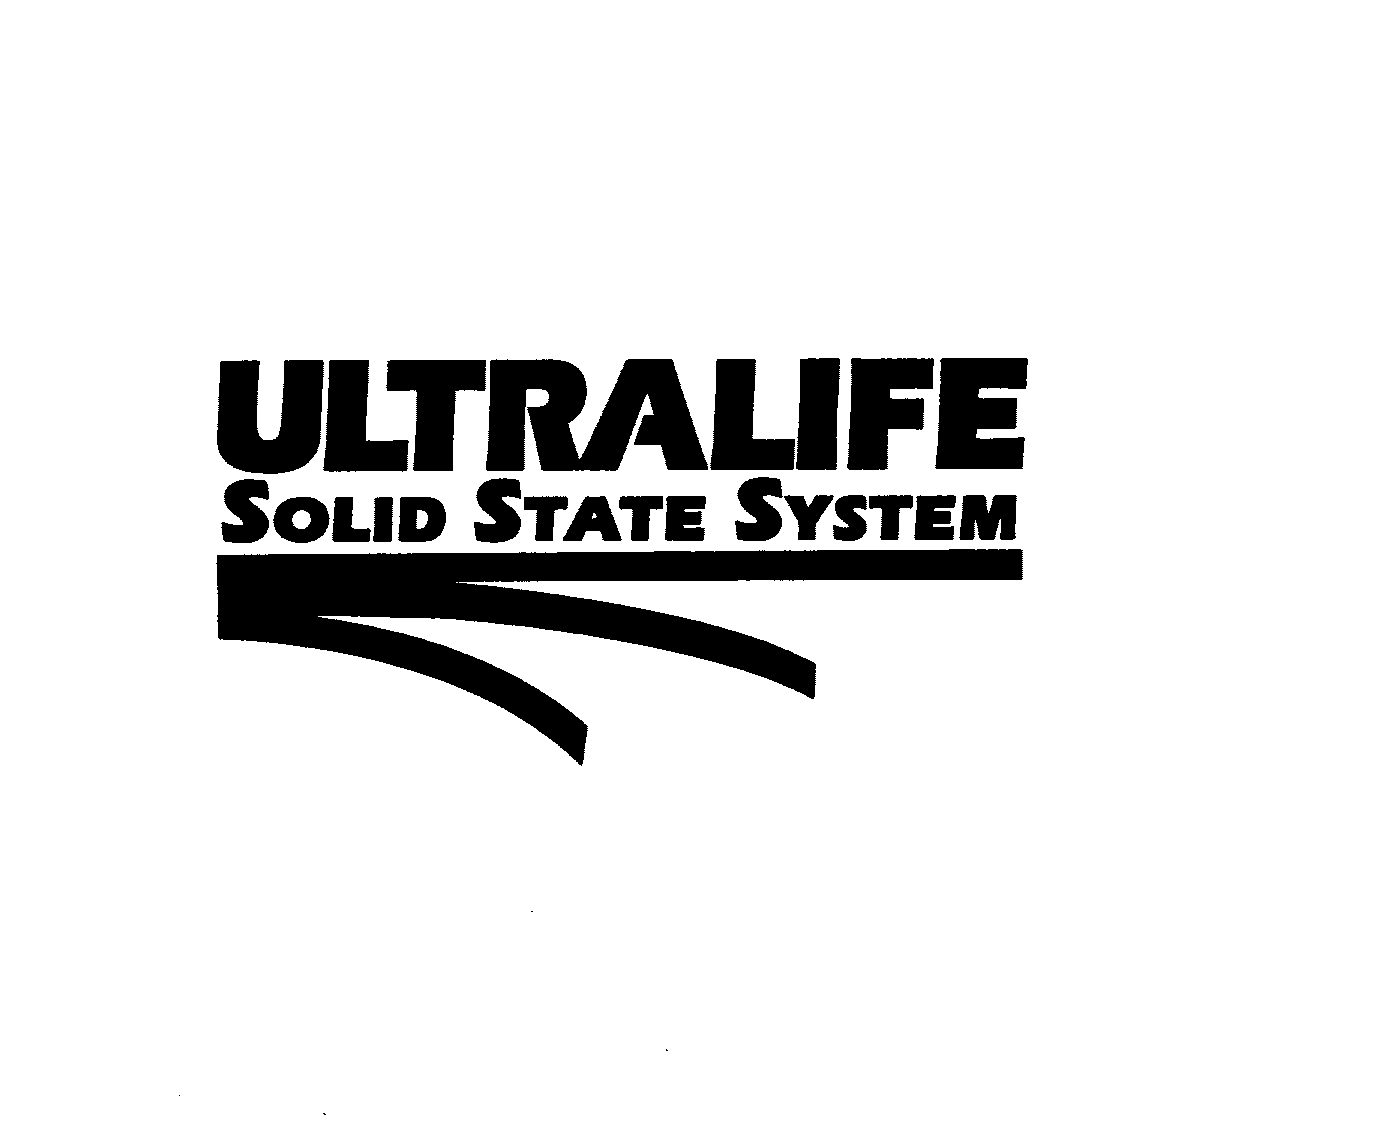  ULTRALIFE SOLID STATE SYSTEM